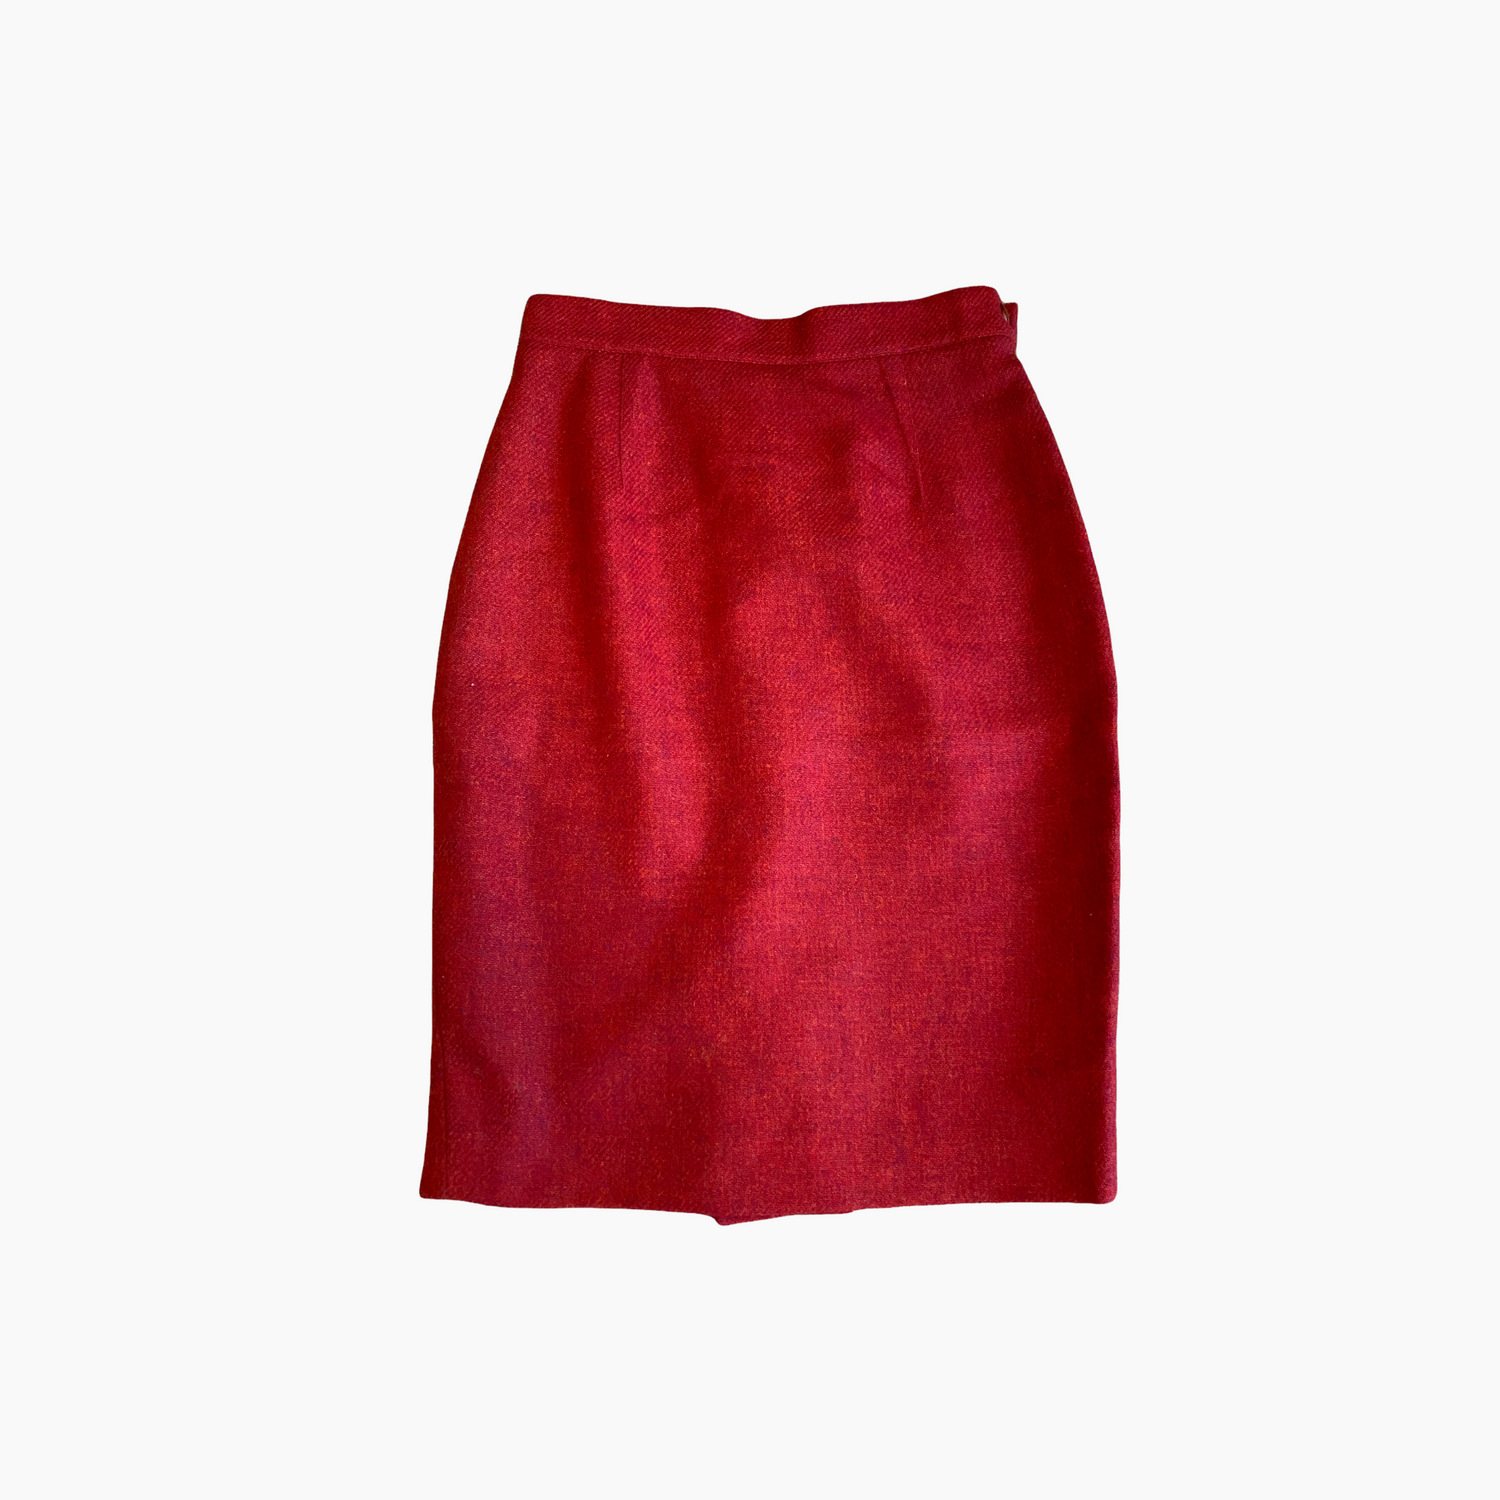 Mugler vintage skirt in red tweet with lace up detail - S - 1990s Lysis